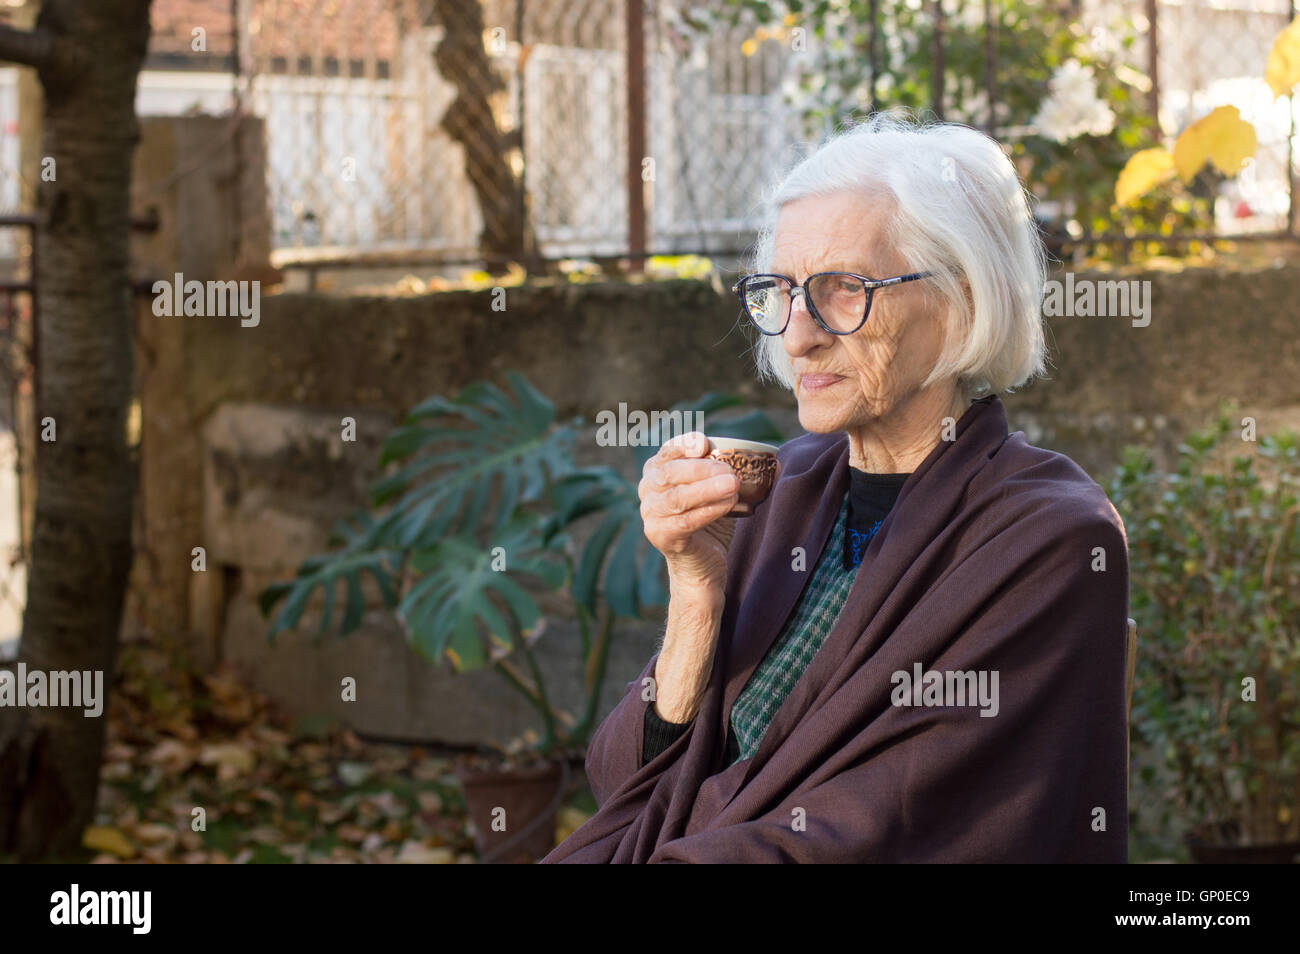 Senior woman having cup of coffee outdoors Stock Photo